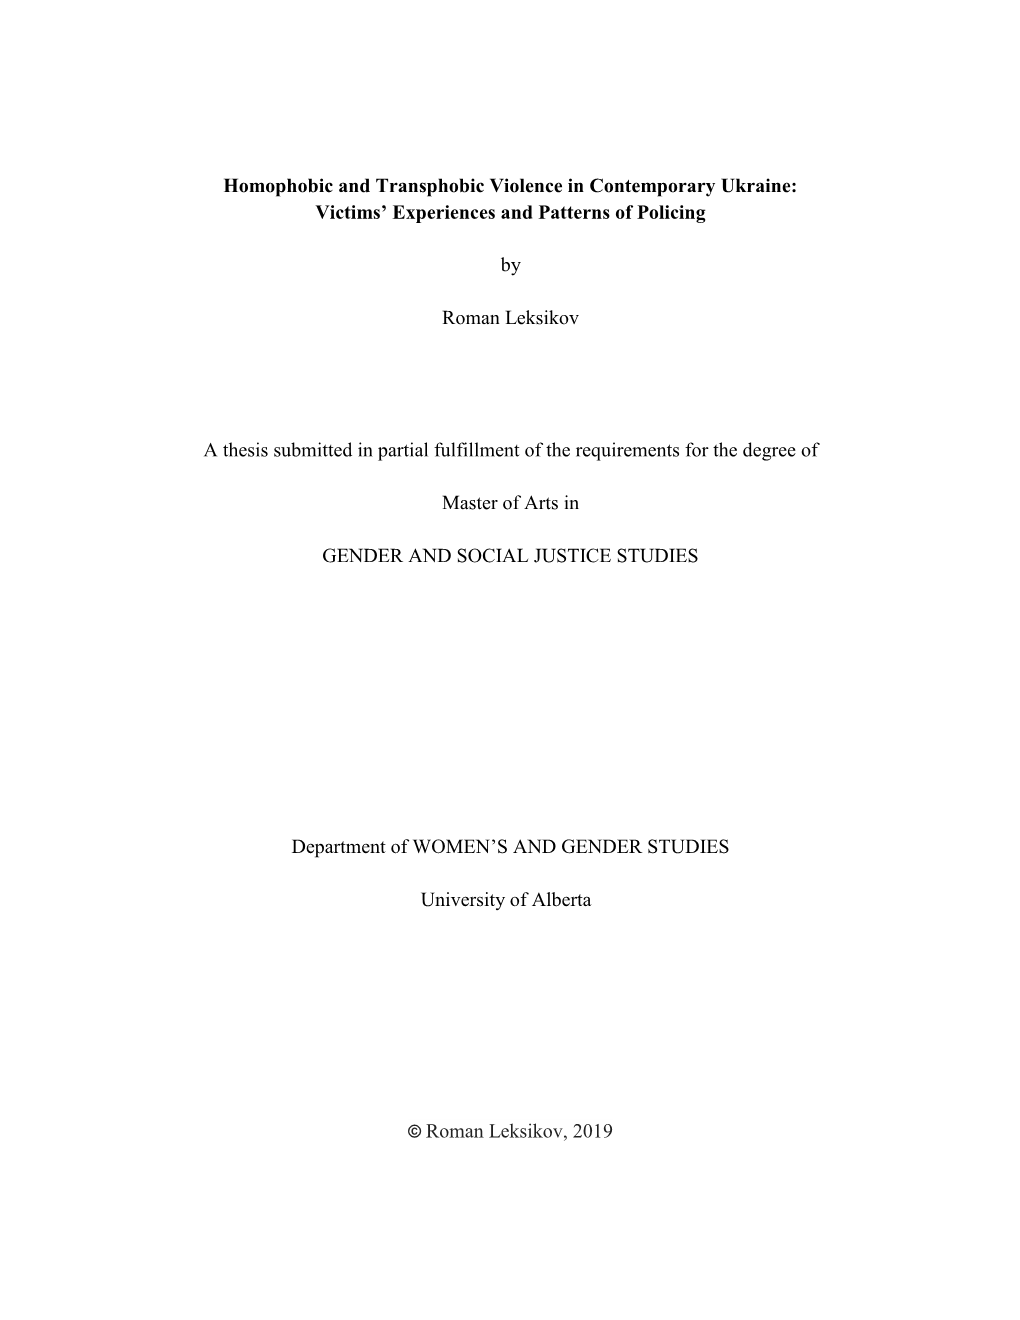 Homophobic and Transphobic Violence in Contemporary Ukraine: Victims' Experiences and Patterns of Policing by Roman Leksikov A